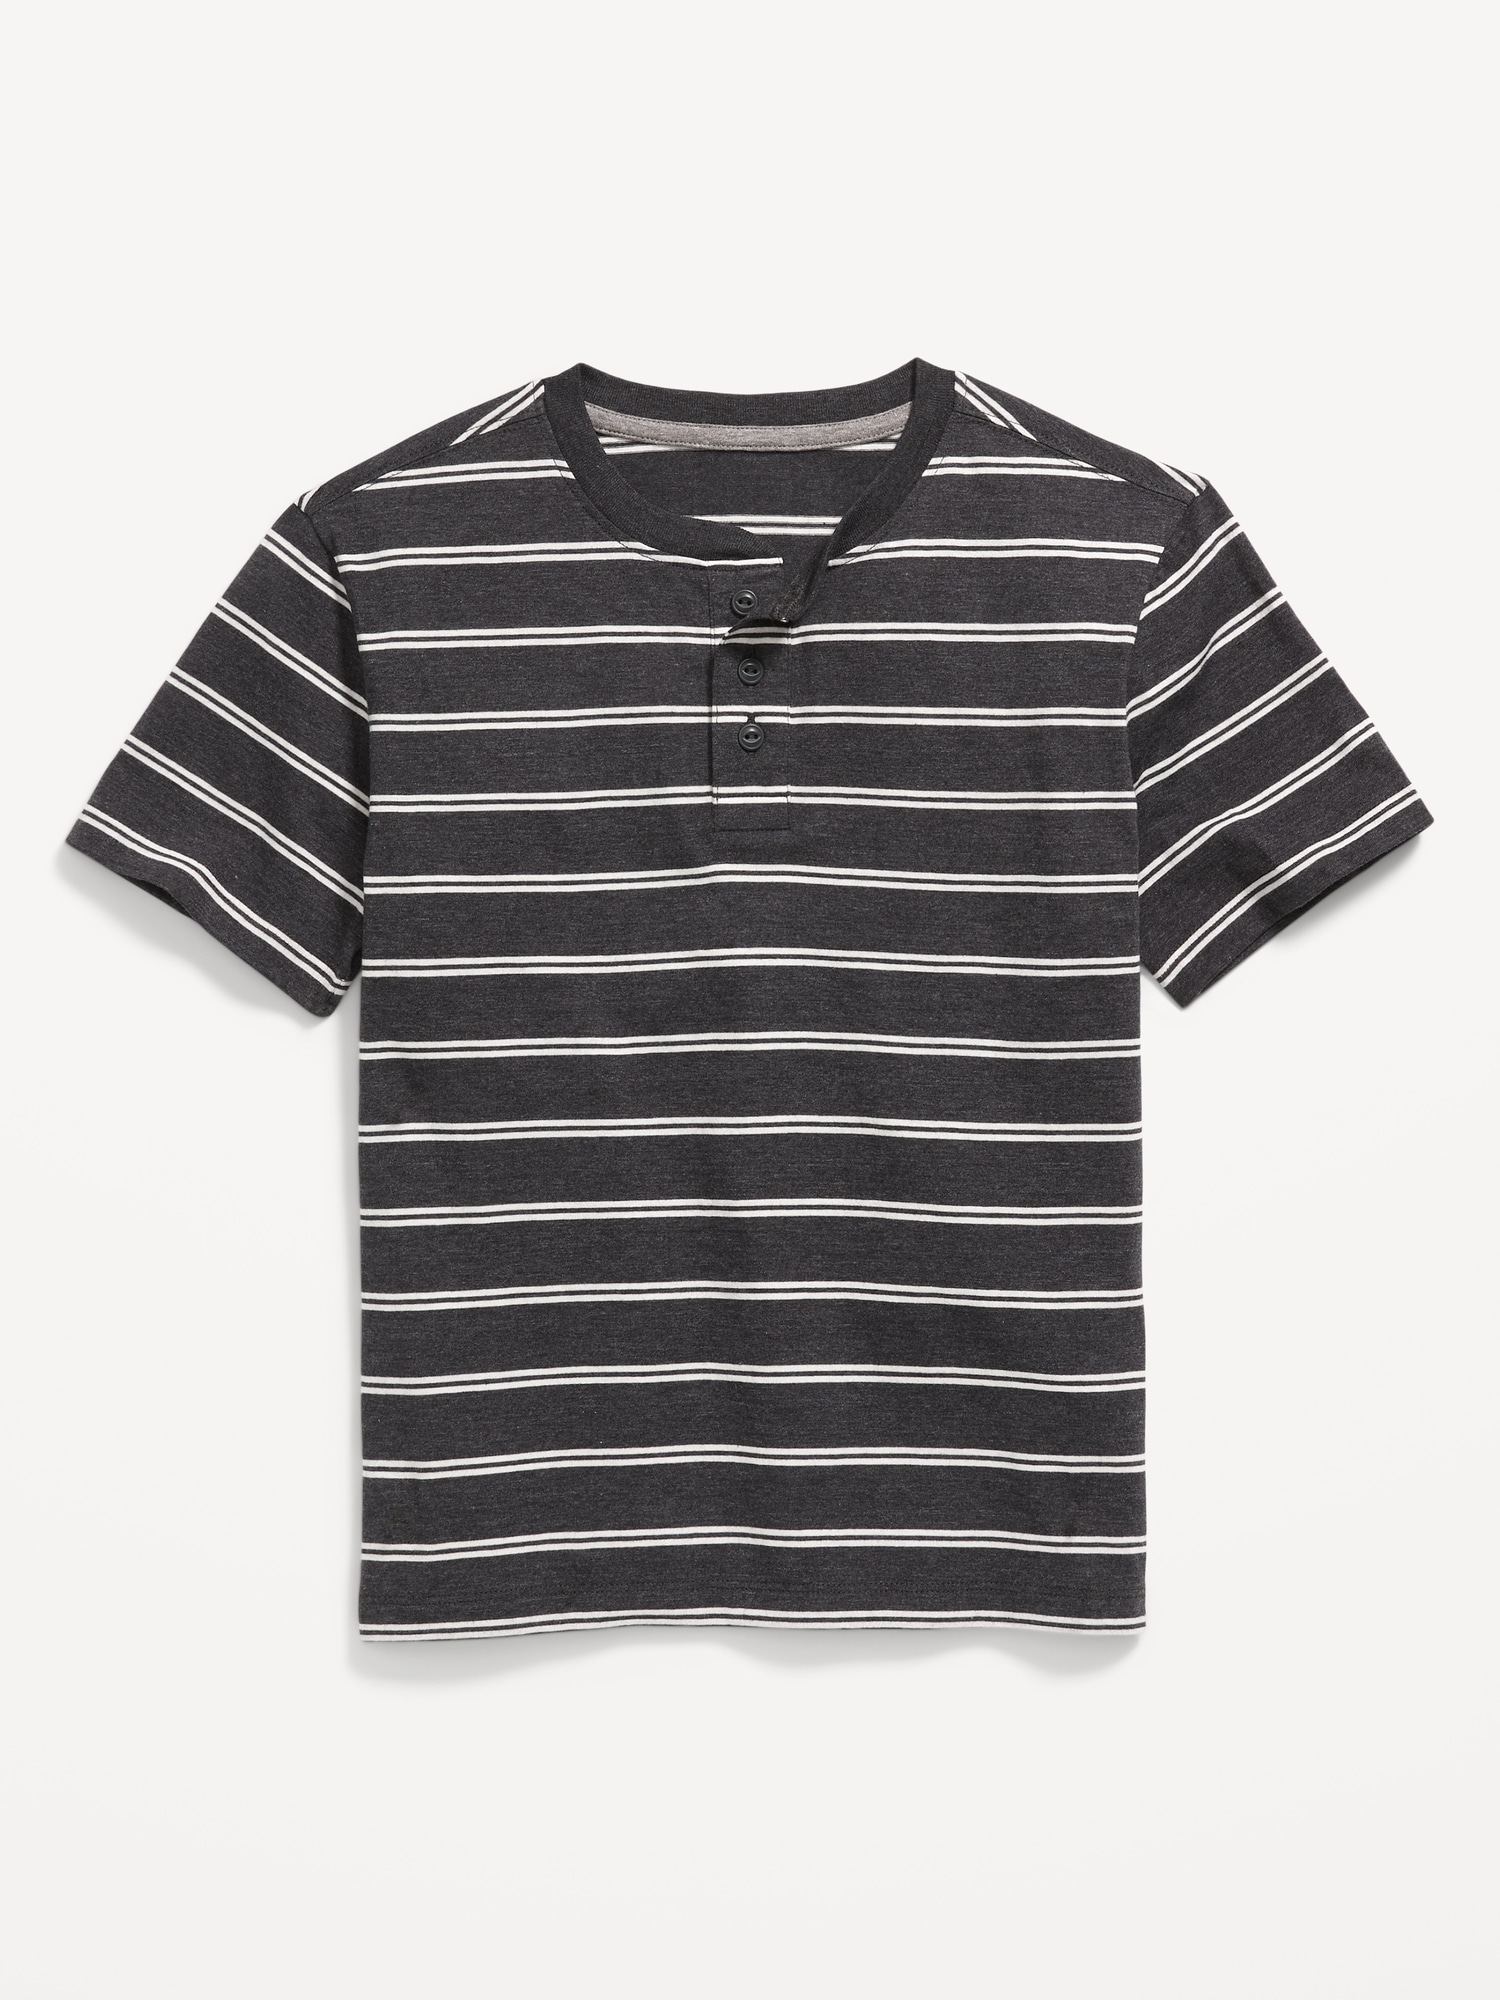 Striped Short-Sleeve Henley T-Shirt for Boys | Old Navy